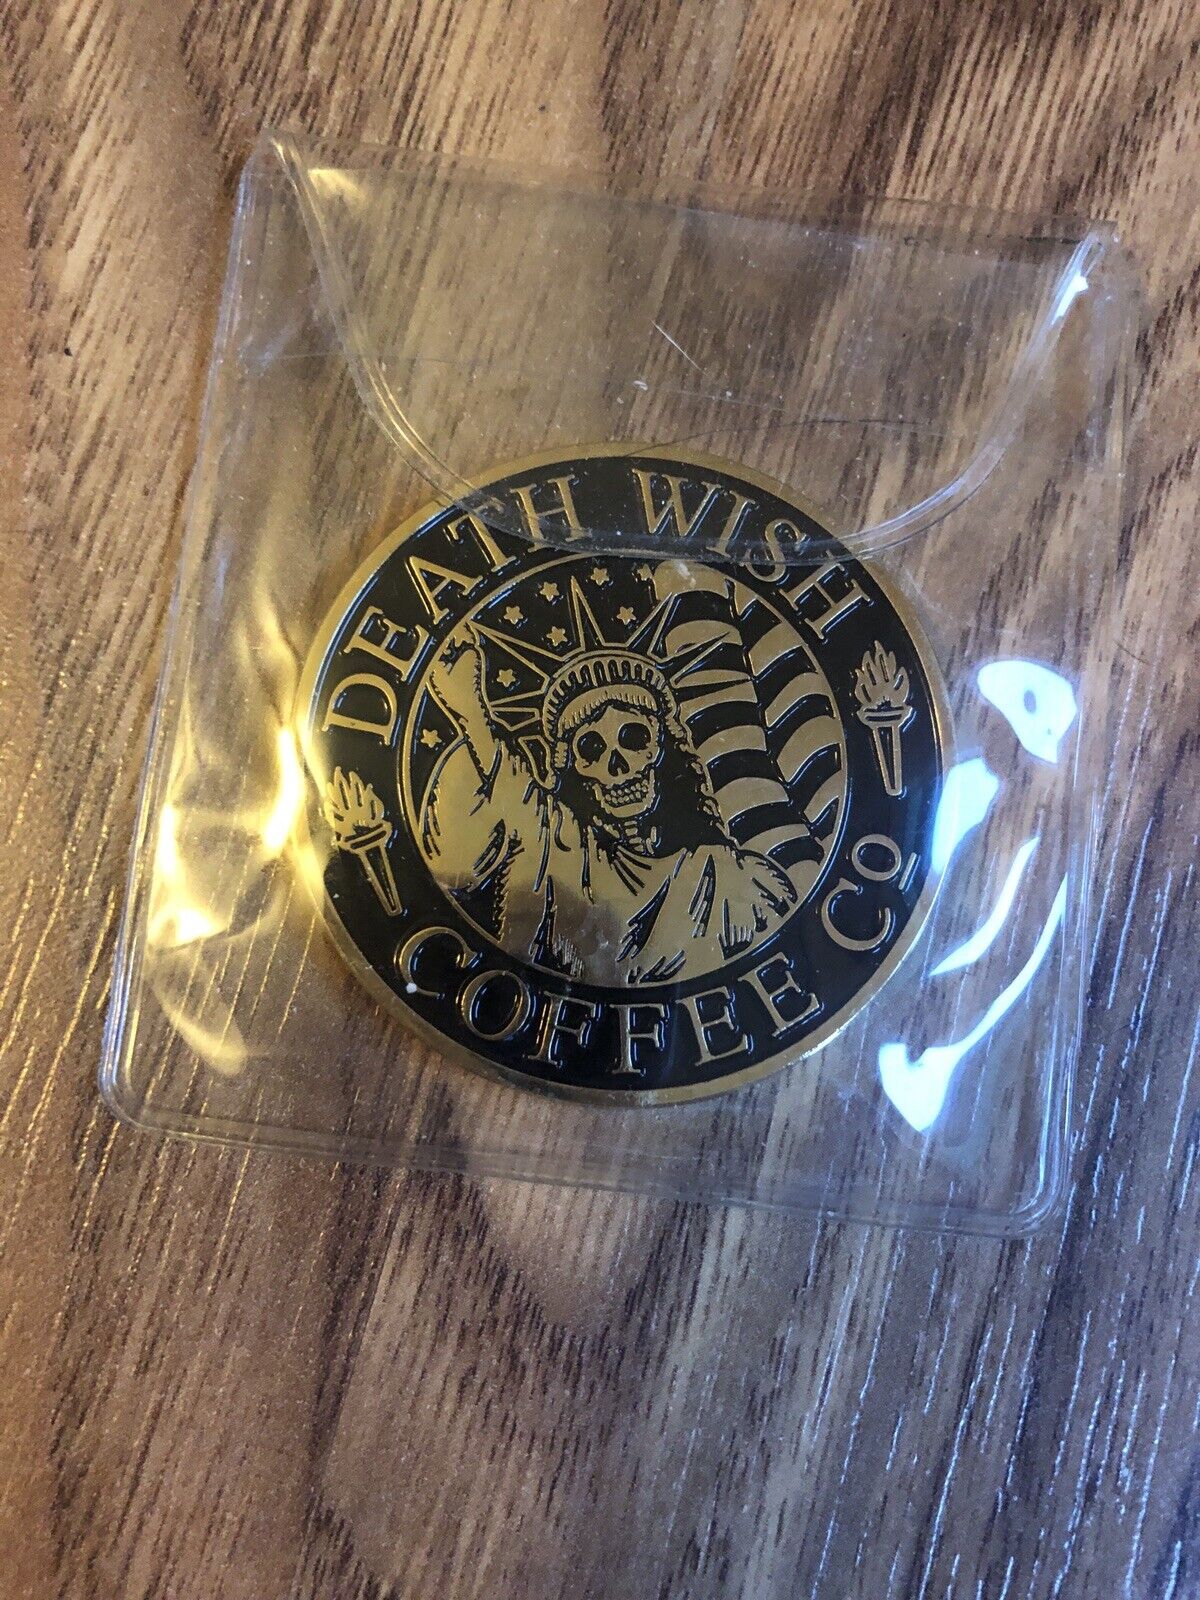 Death Wish Coffee Lady Liberty Challenge Coin Mint + Sticker